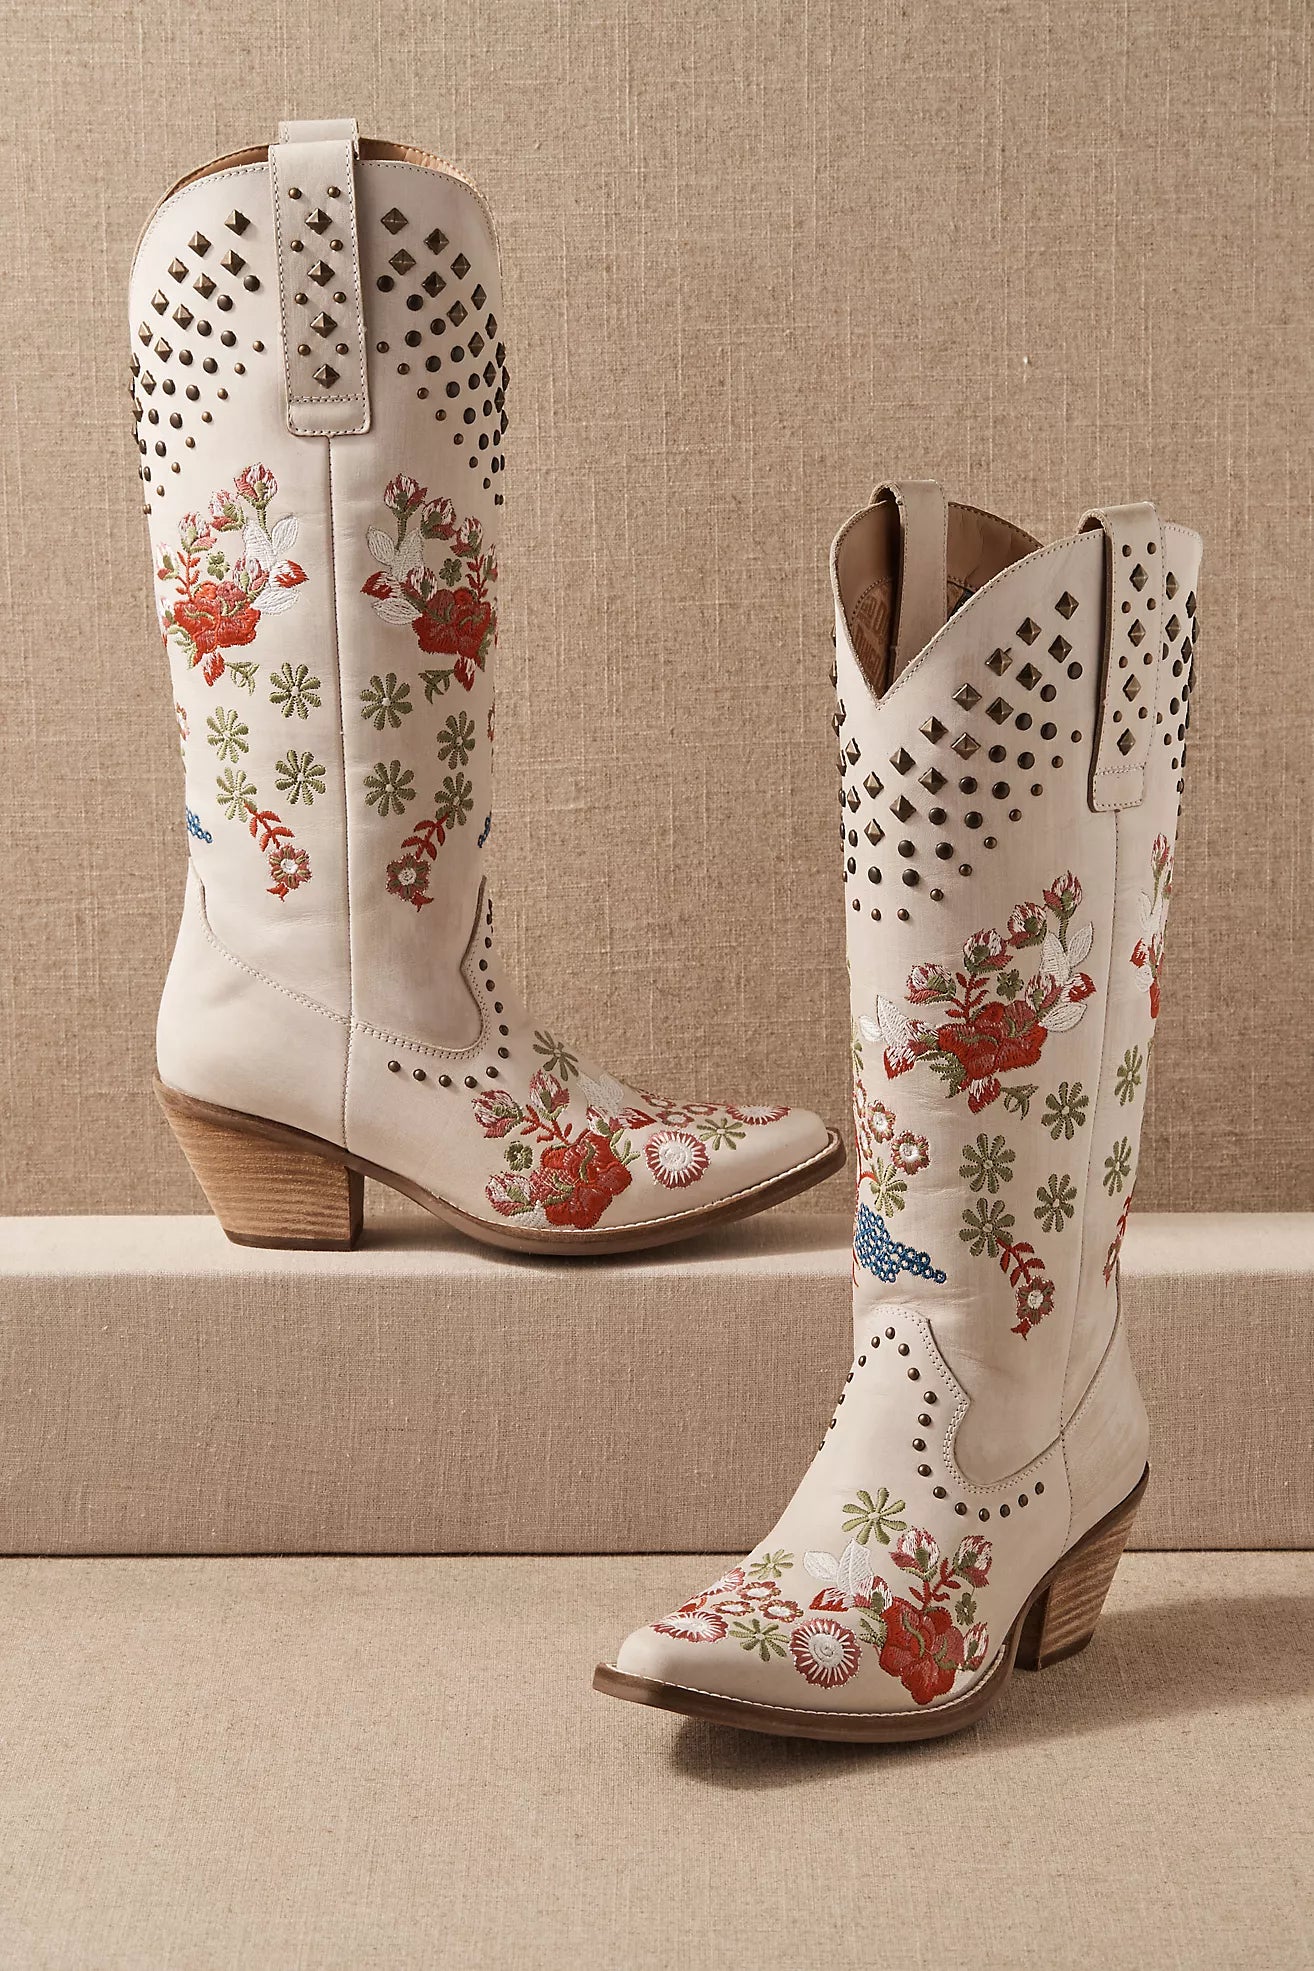 WOMEN'S POPPY WHITE STUDDED FLORAL EMBROIDERED SNIP TOE